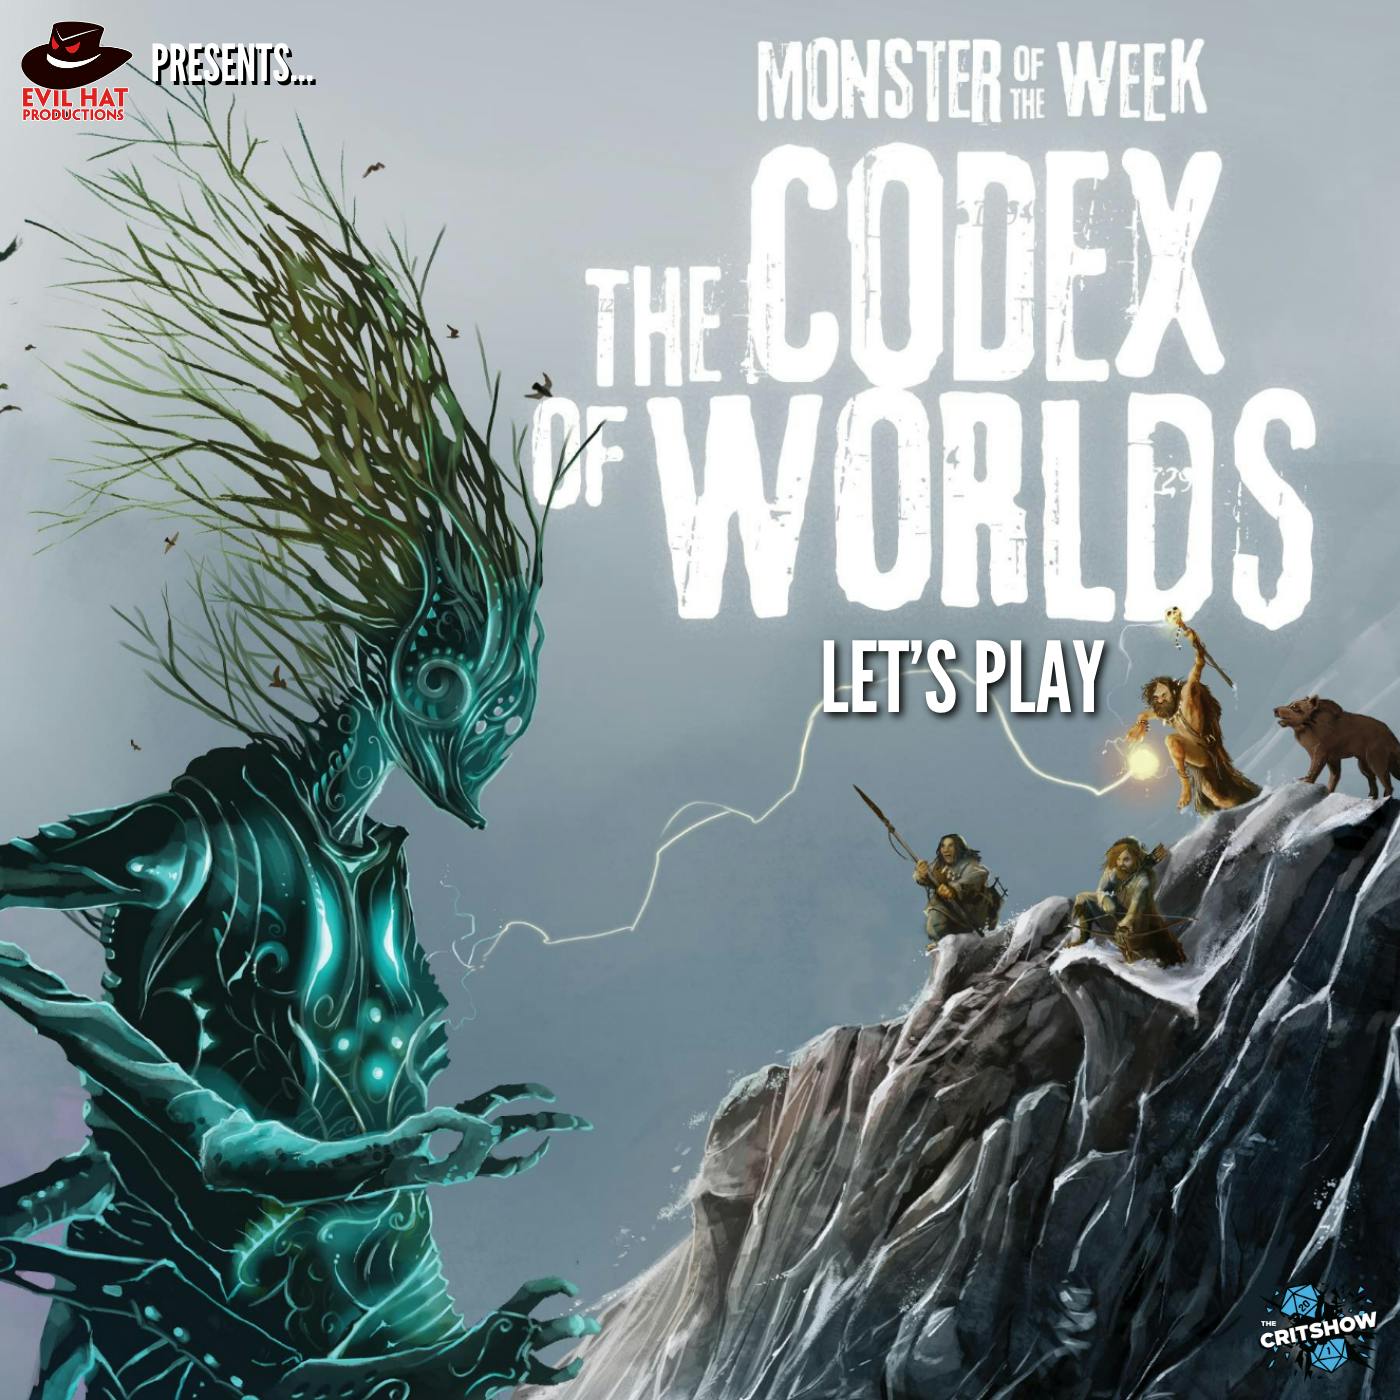 The Critshow: The Codex of Worlds (Pt 3)